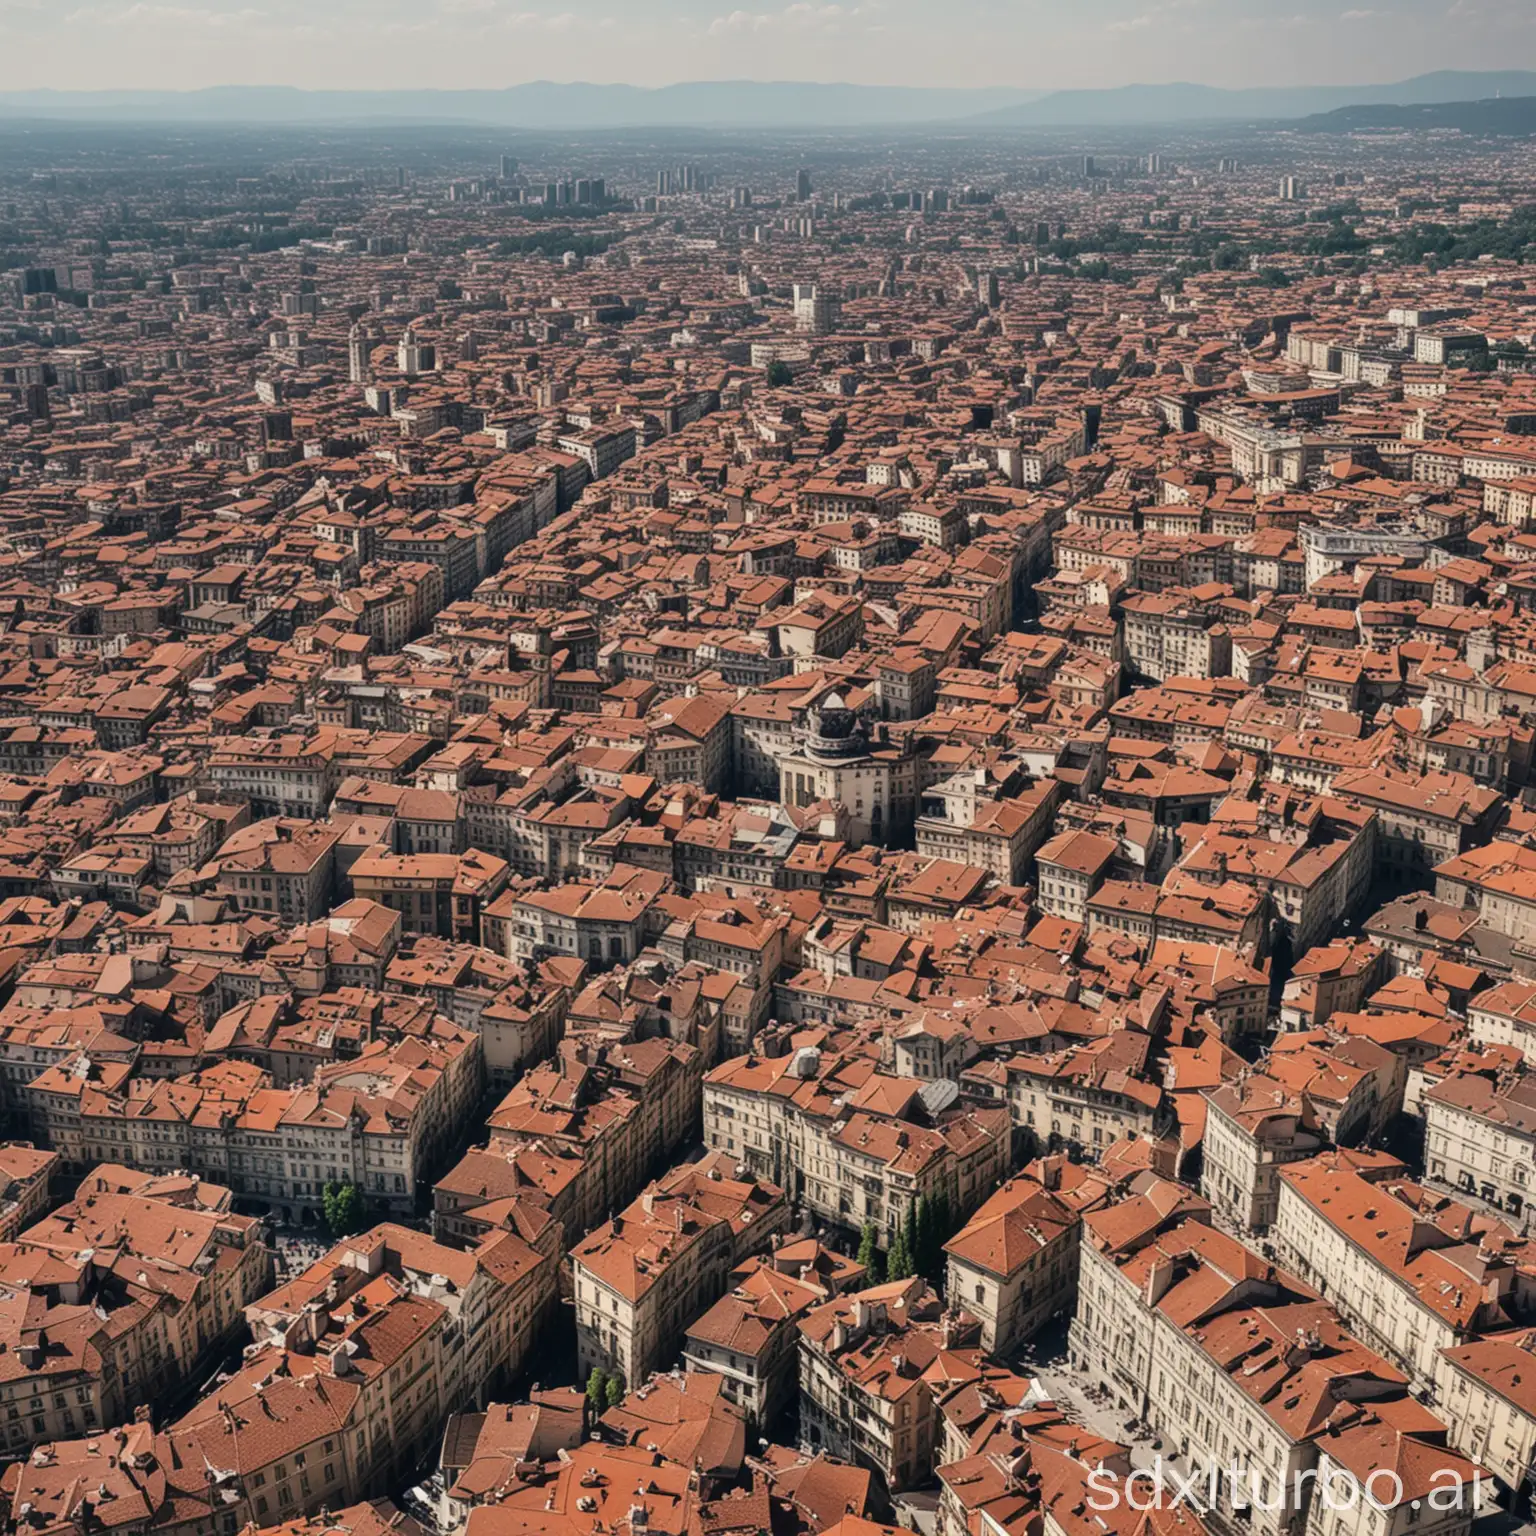 the city of Milan Bergamo from the eyes of someone who wants to travel there for leisure